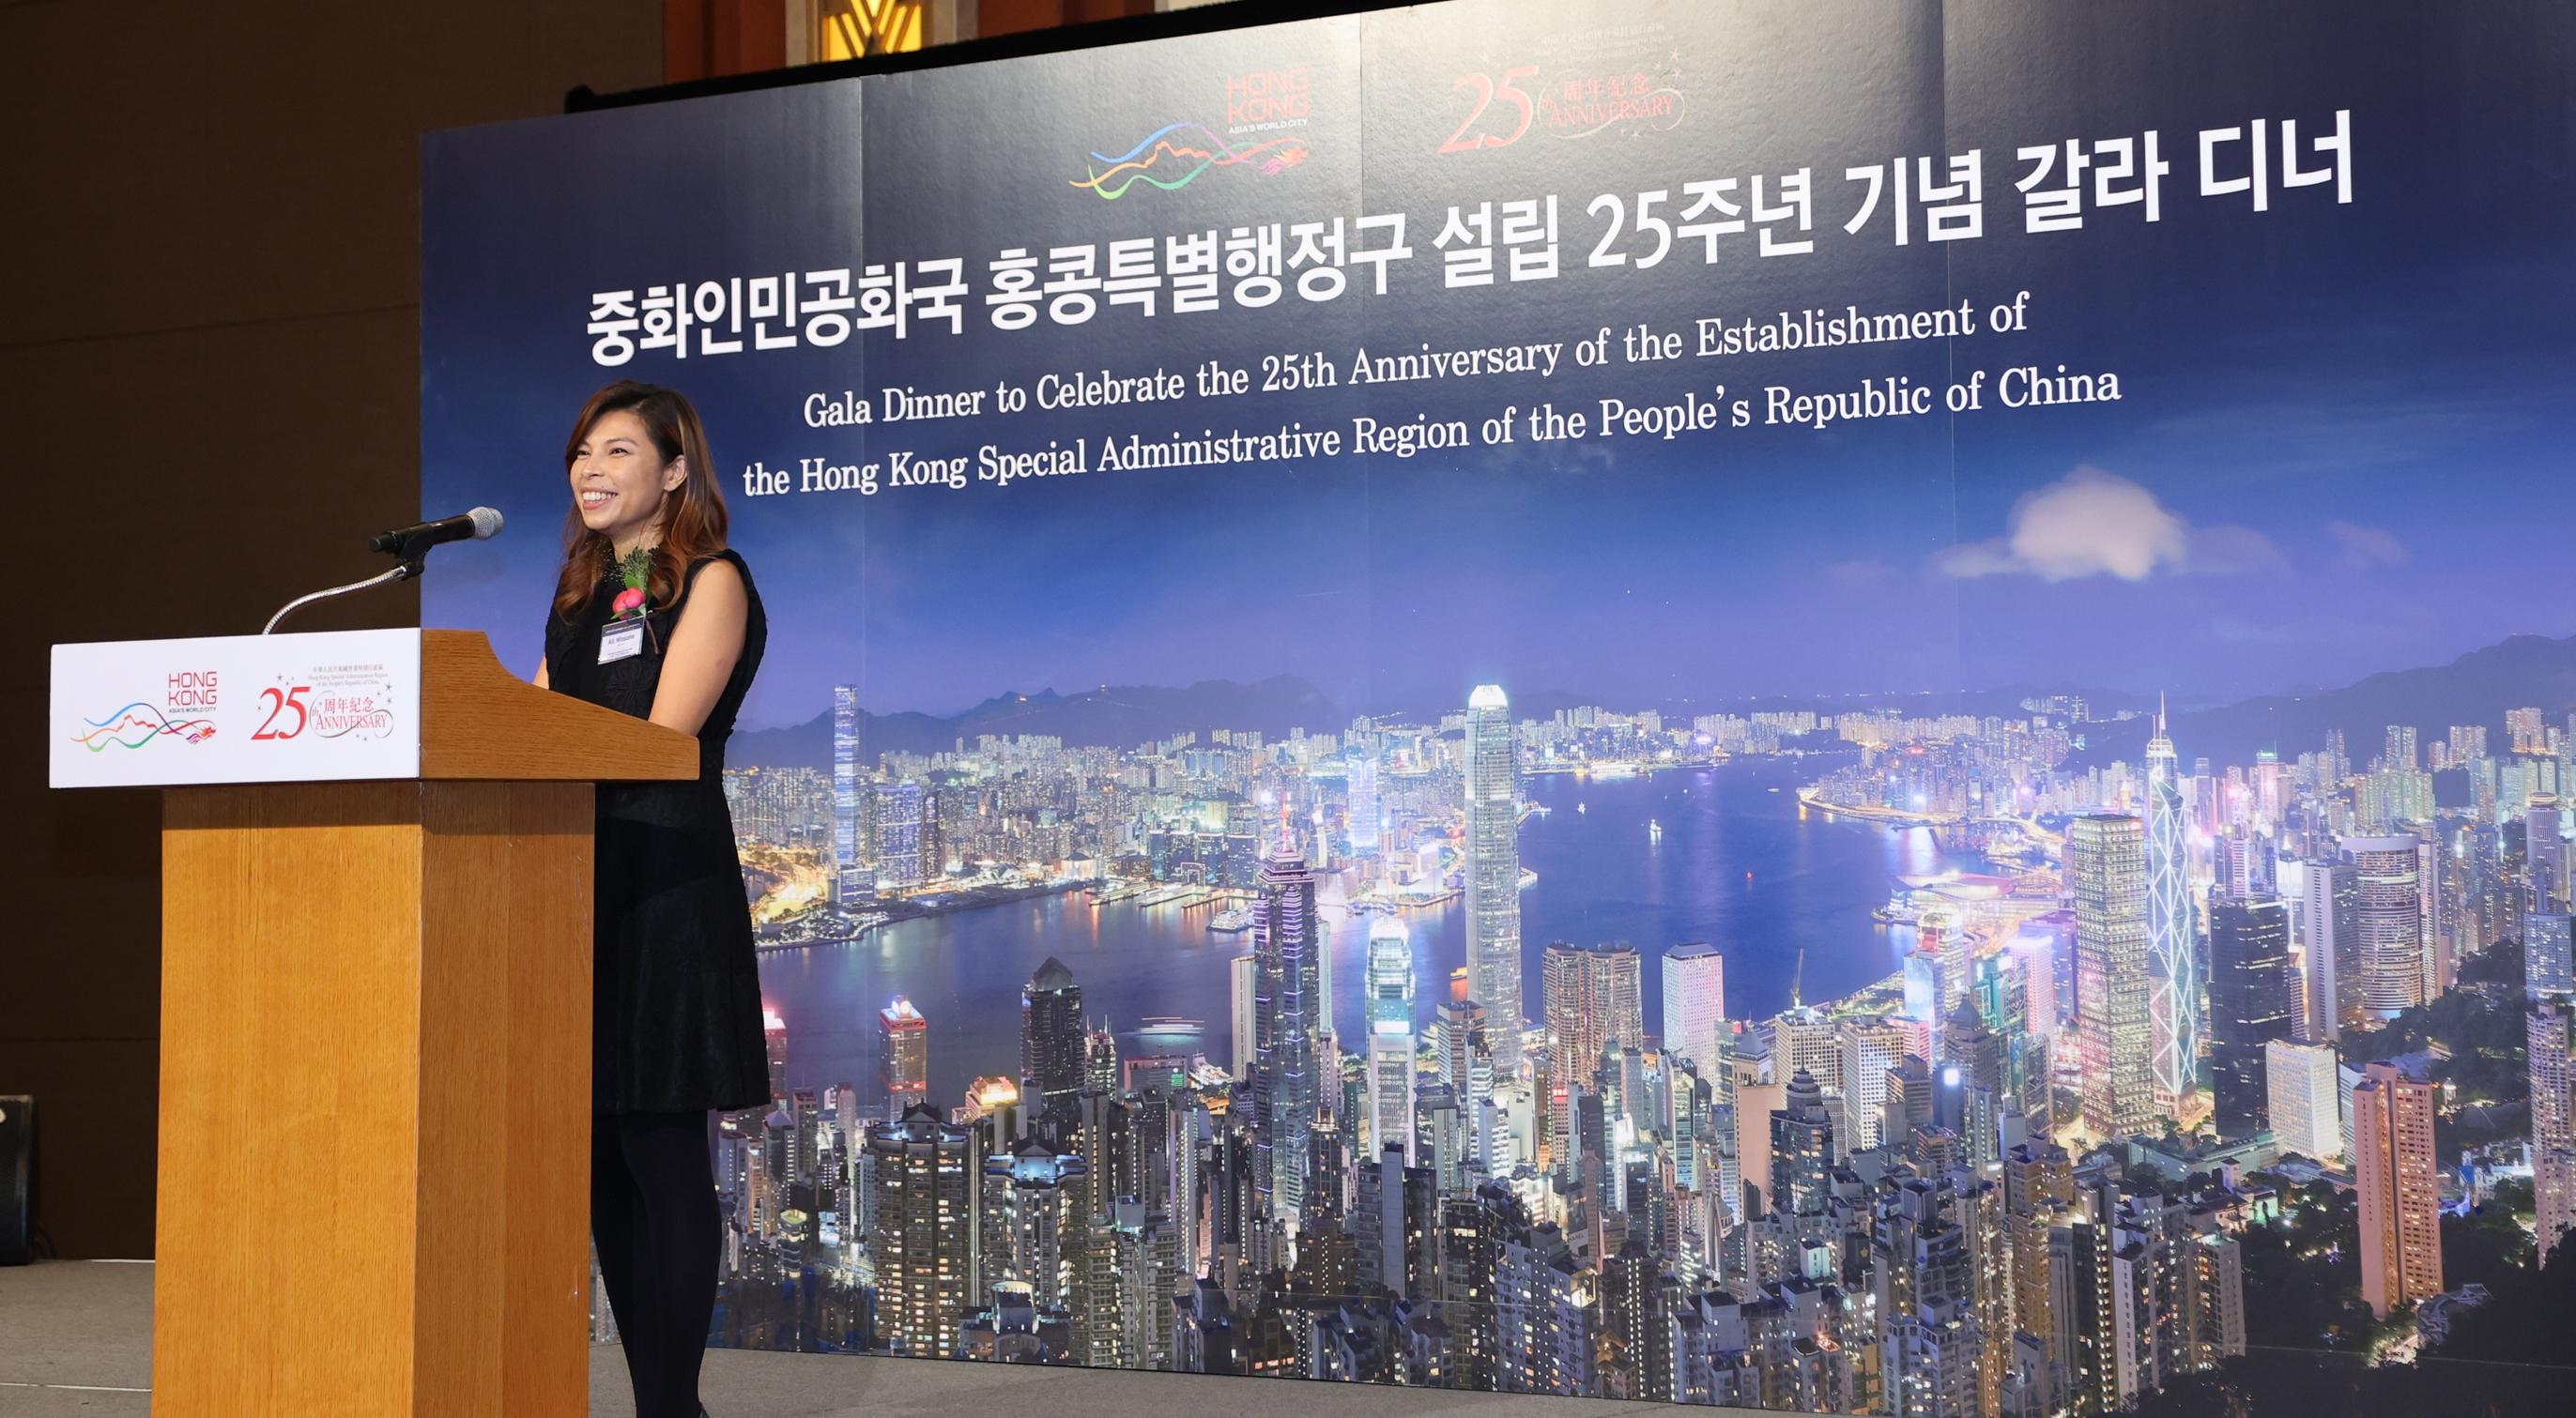 The Acting Principal Hong Kong Economic and Trade Representative (Tokyo), Miss Winsome Au, delivers a speech today (September 22) at a gala dinner in Seoul, Korea, to celebrate the 25th anniversary of the establishment of the Hong Kong Special Administrative Region.